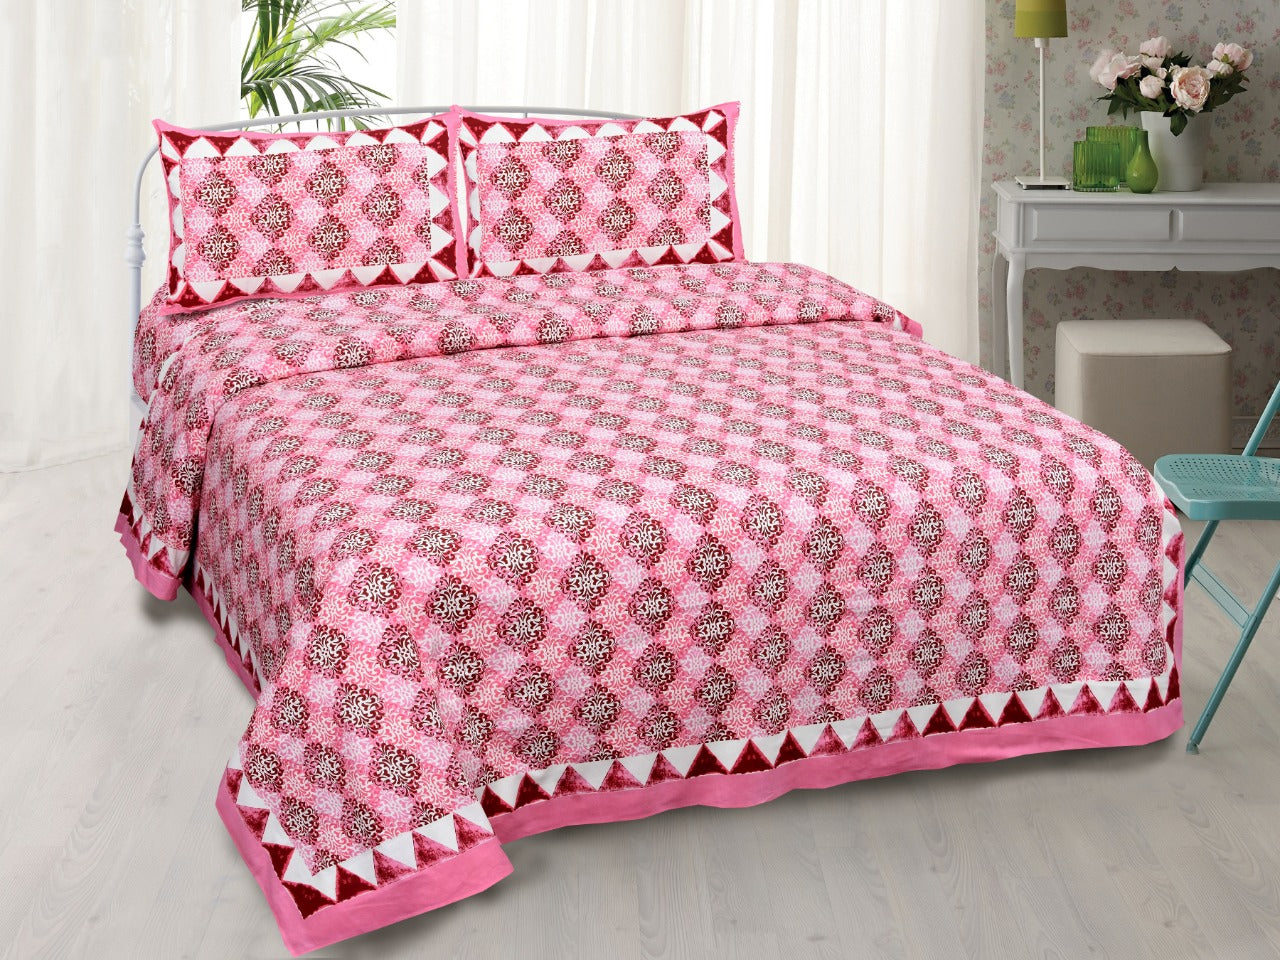 Pink colored Jaipuri Bagru Hand Block Printed Double Bedsheets with stitched pillow cover